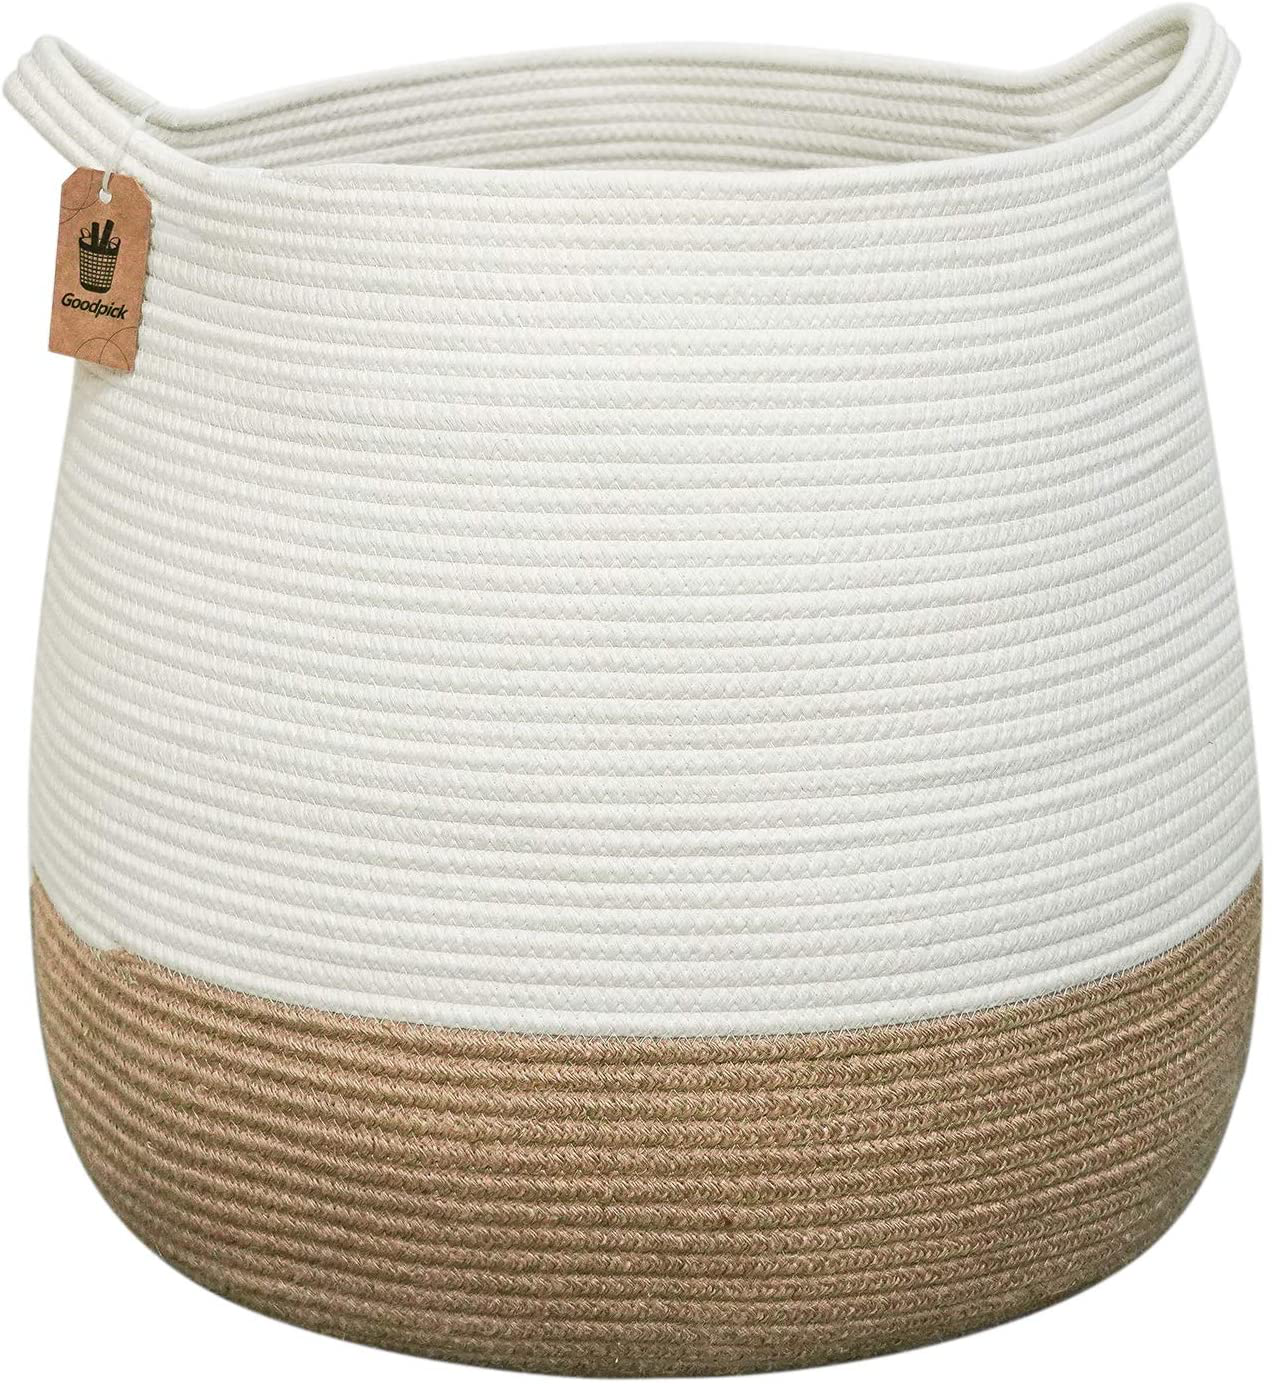 Goodpick Cotton Rope Storage Basket- Jute Basket Woven Planter Basket Rope Laundry Basket with Handles for Toys, Blanket and Pot Plant Cover, 16.0" x15.0" x12.6"